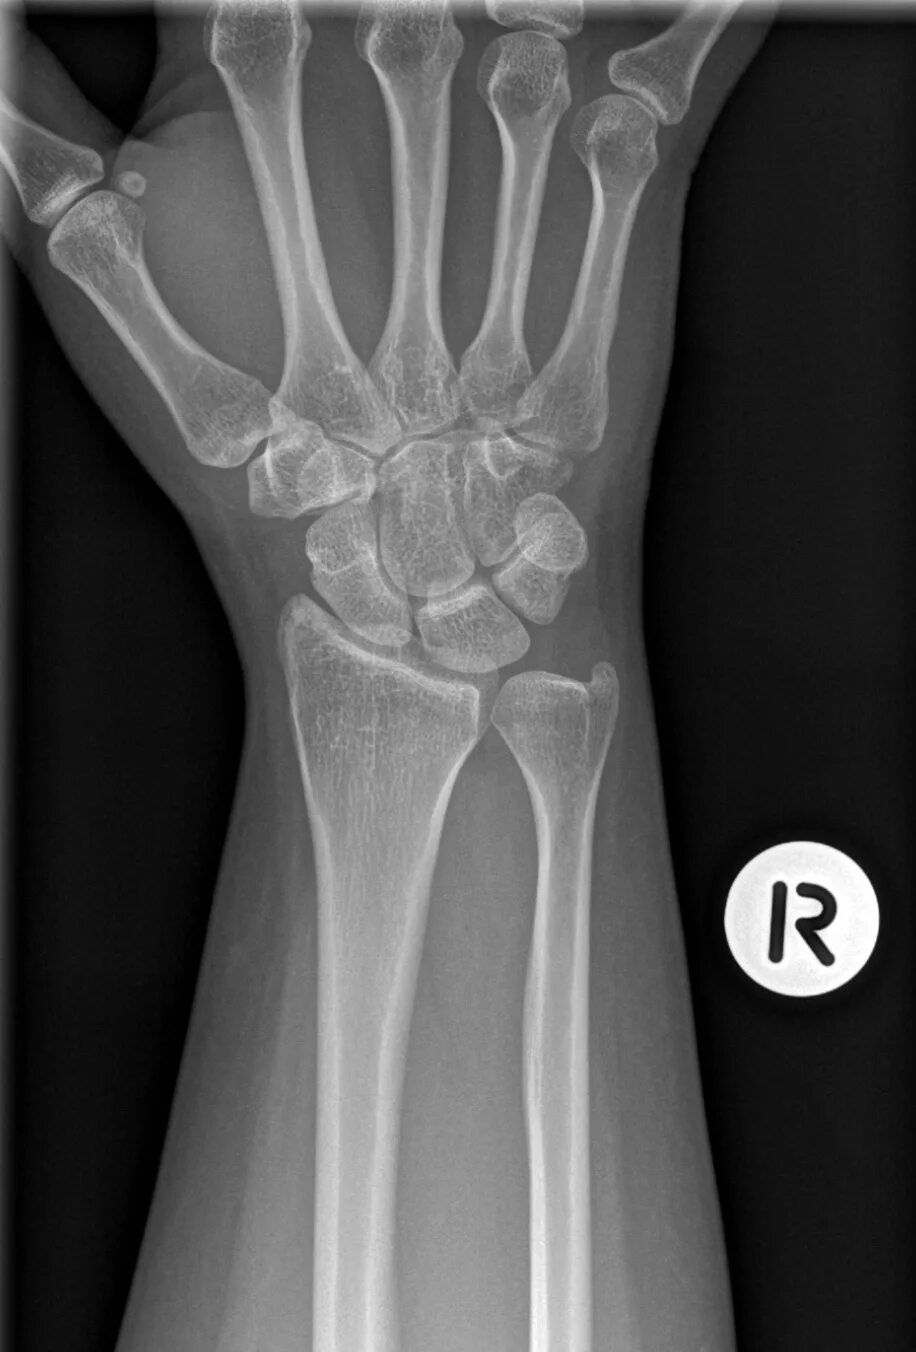 Normal hand XRAY. Xray extension